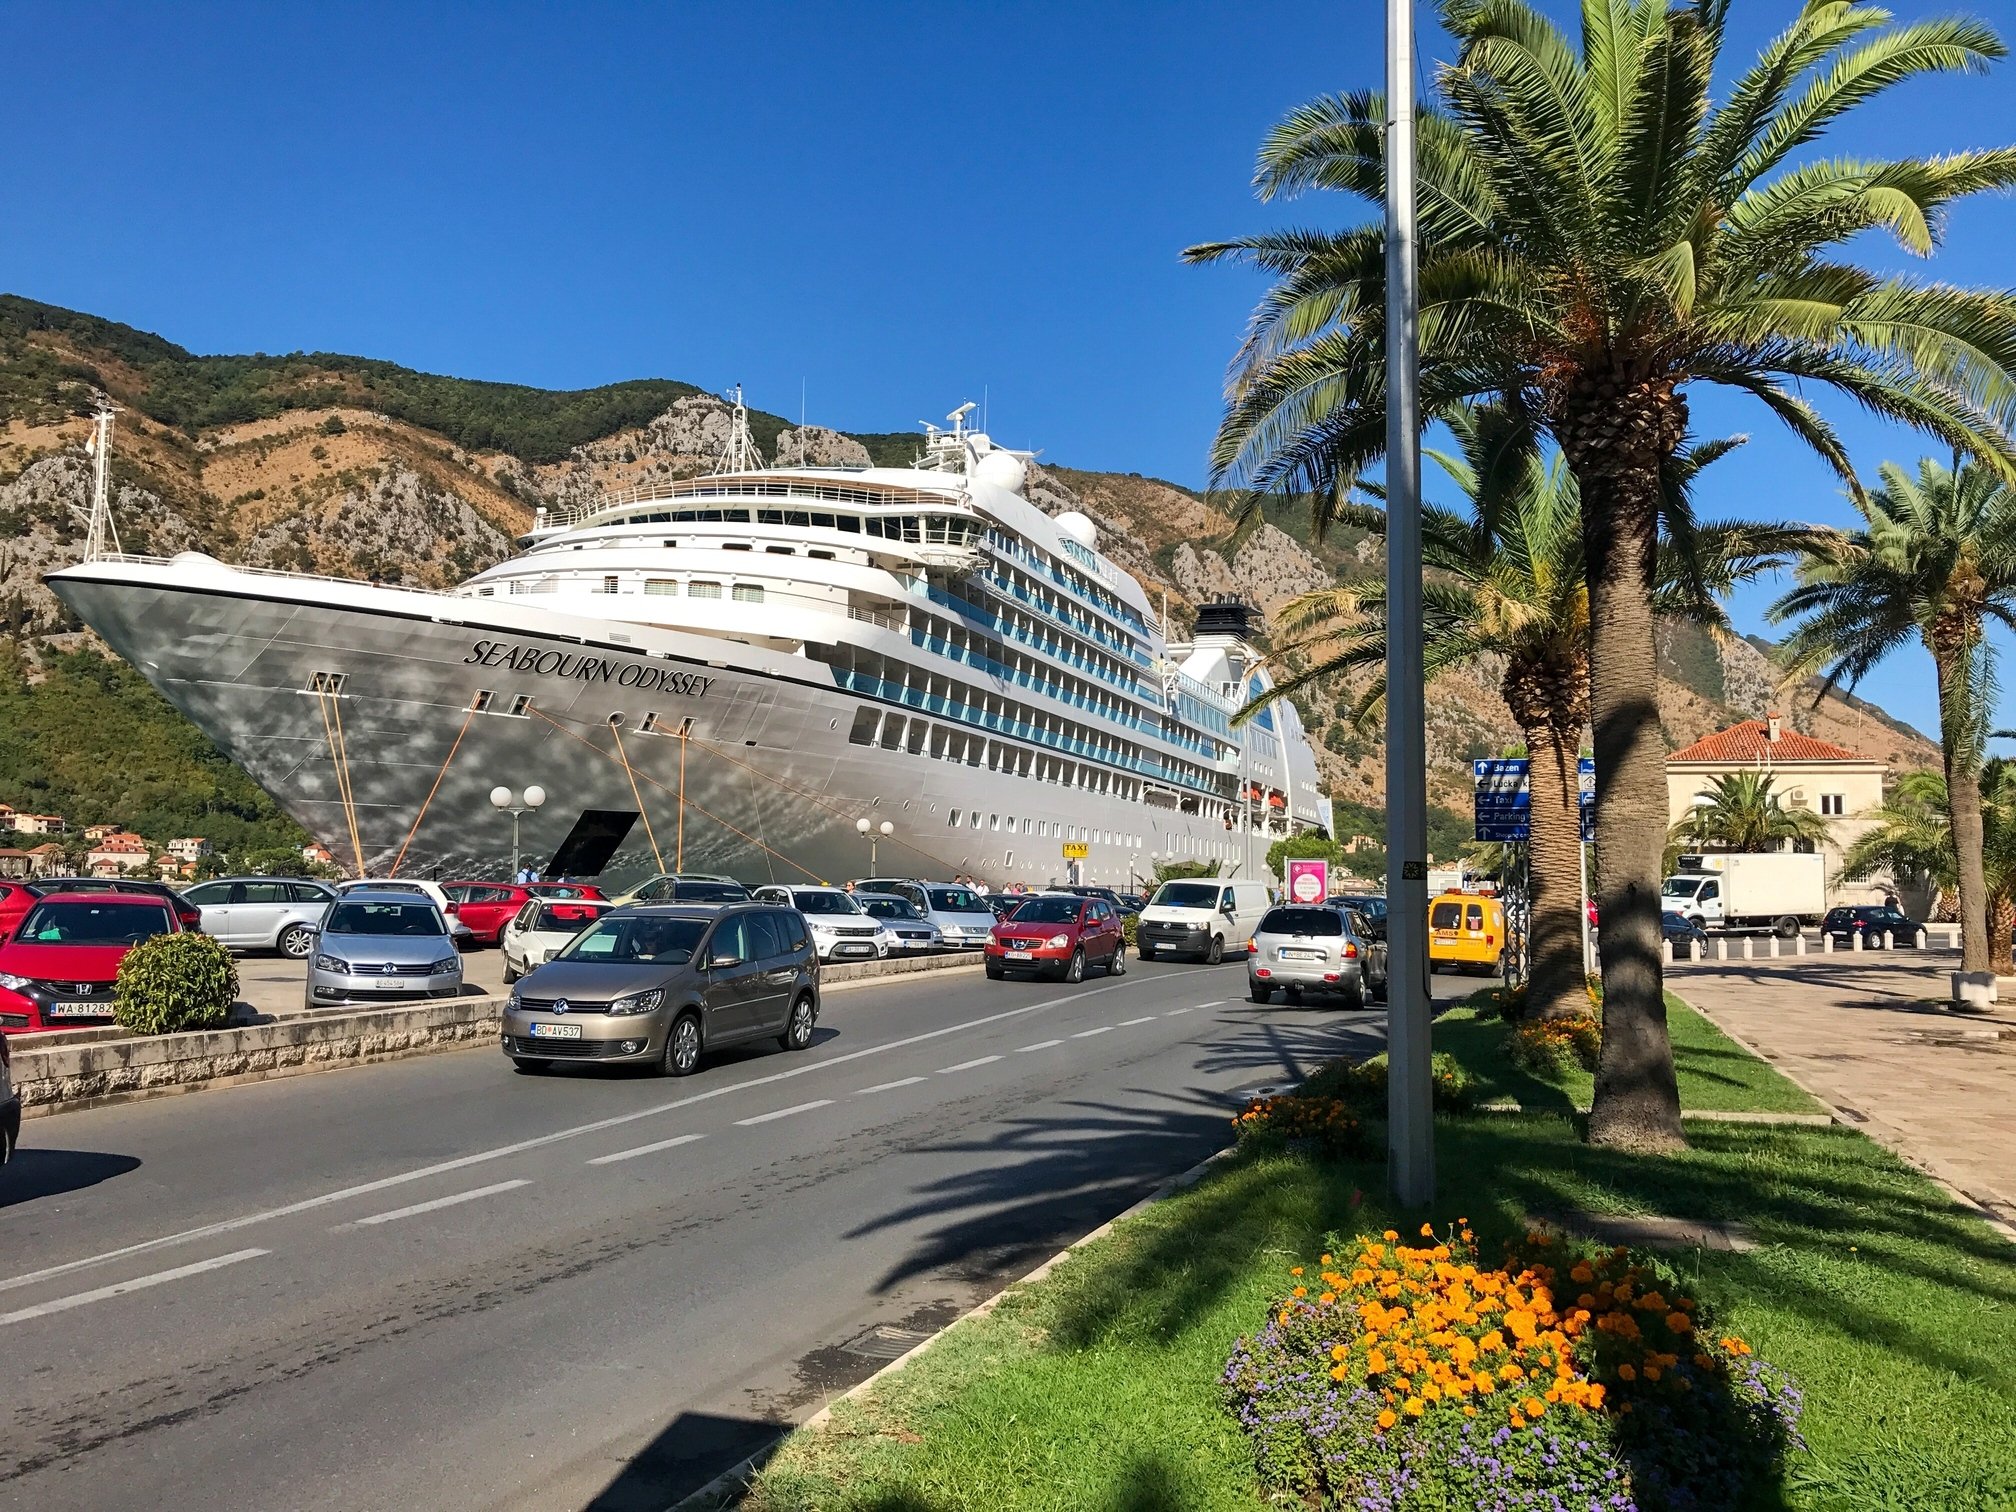 A cruise ship and the city of Kotor, Montenegro.  (Photo by Özge Şengelen)